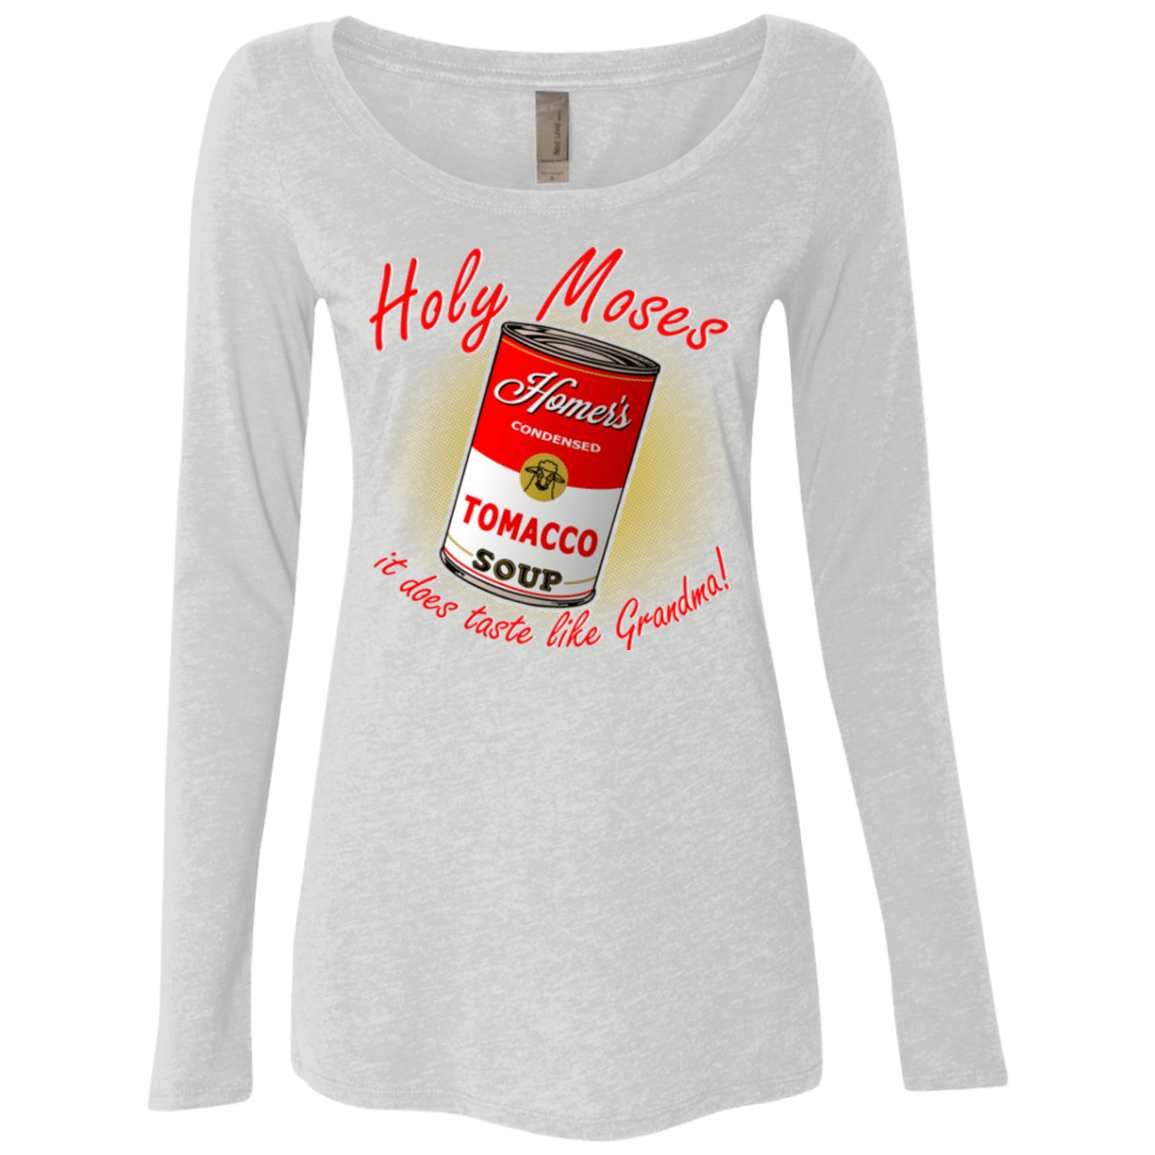 T-Shirts Heather White / Small Holy moses Women's Triblend Long Sleeve Shirt